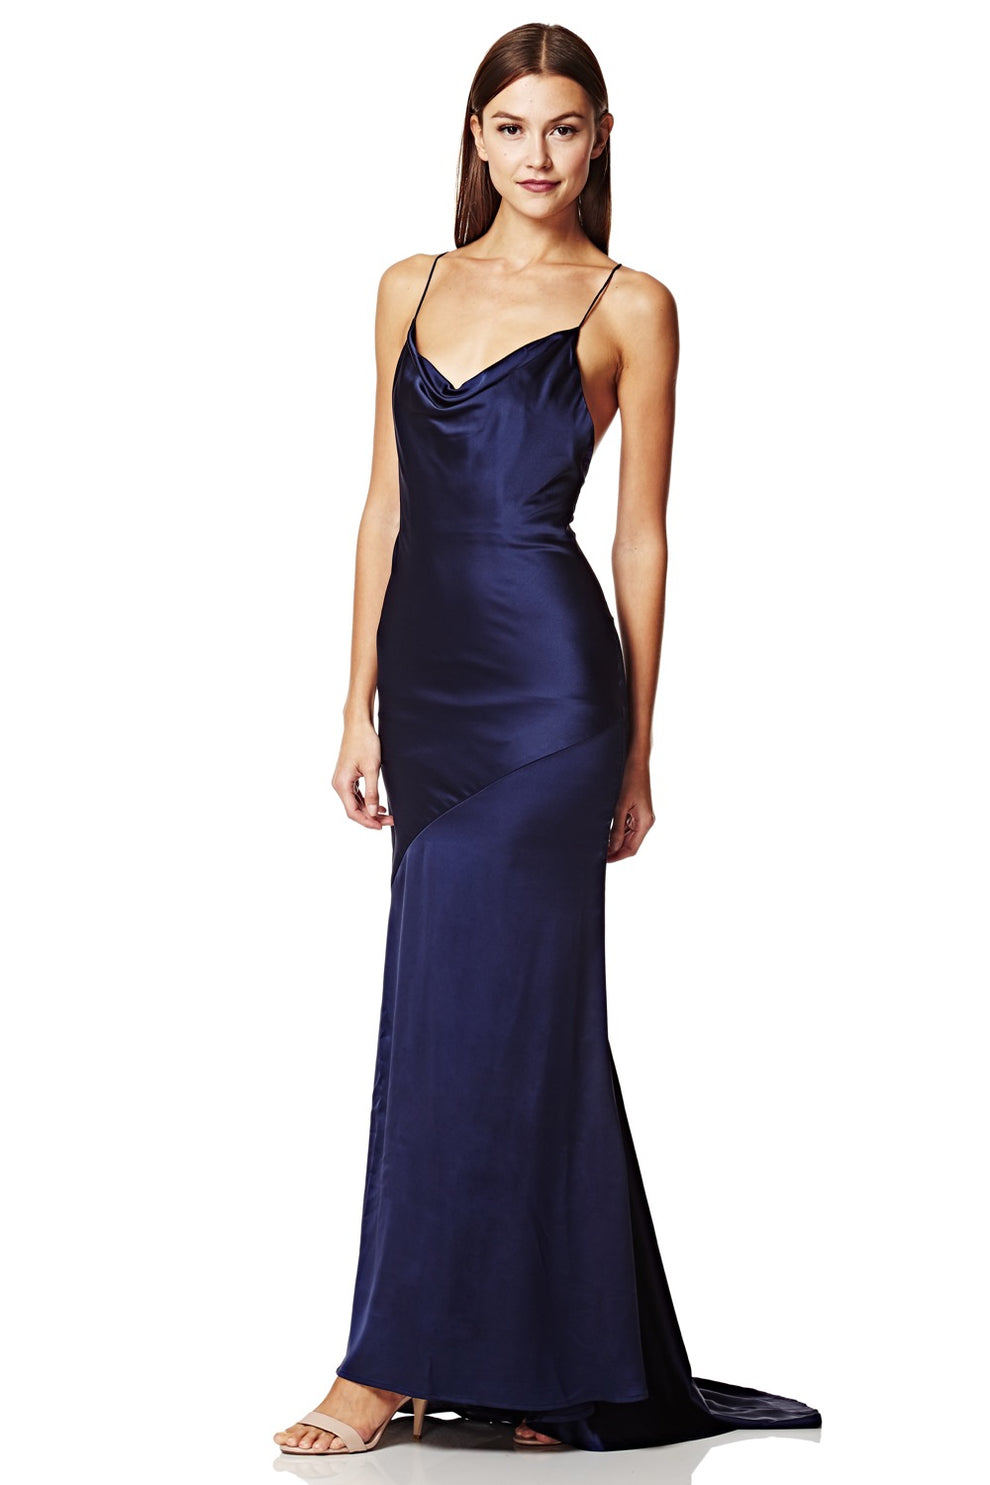 Jarlo's Roxanne Cowl Neck Maxi Dress with Open Back in Navy Satin ...